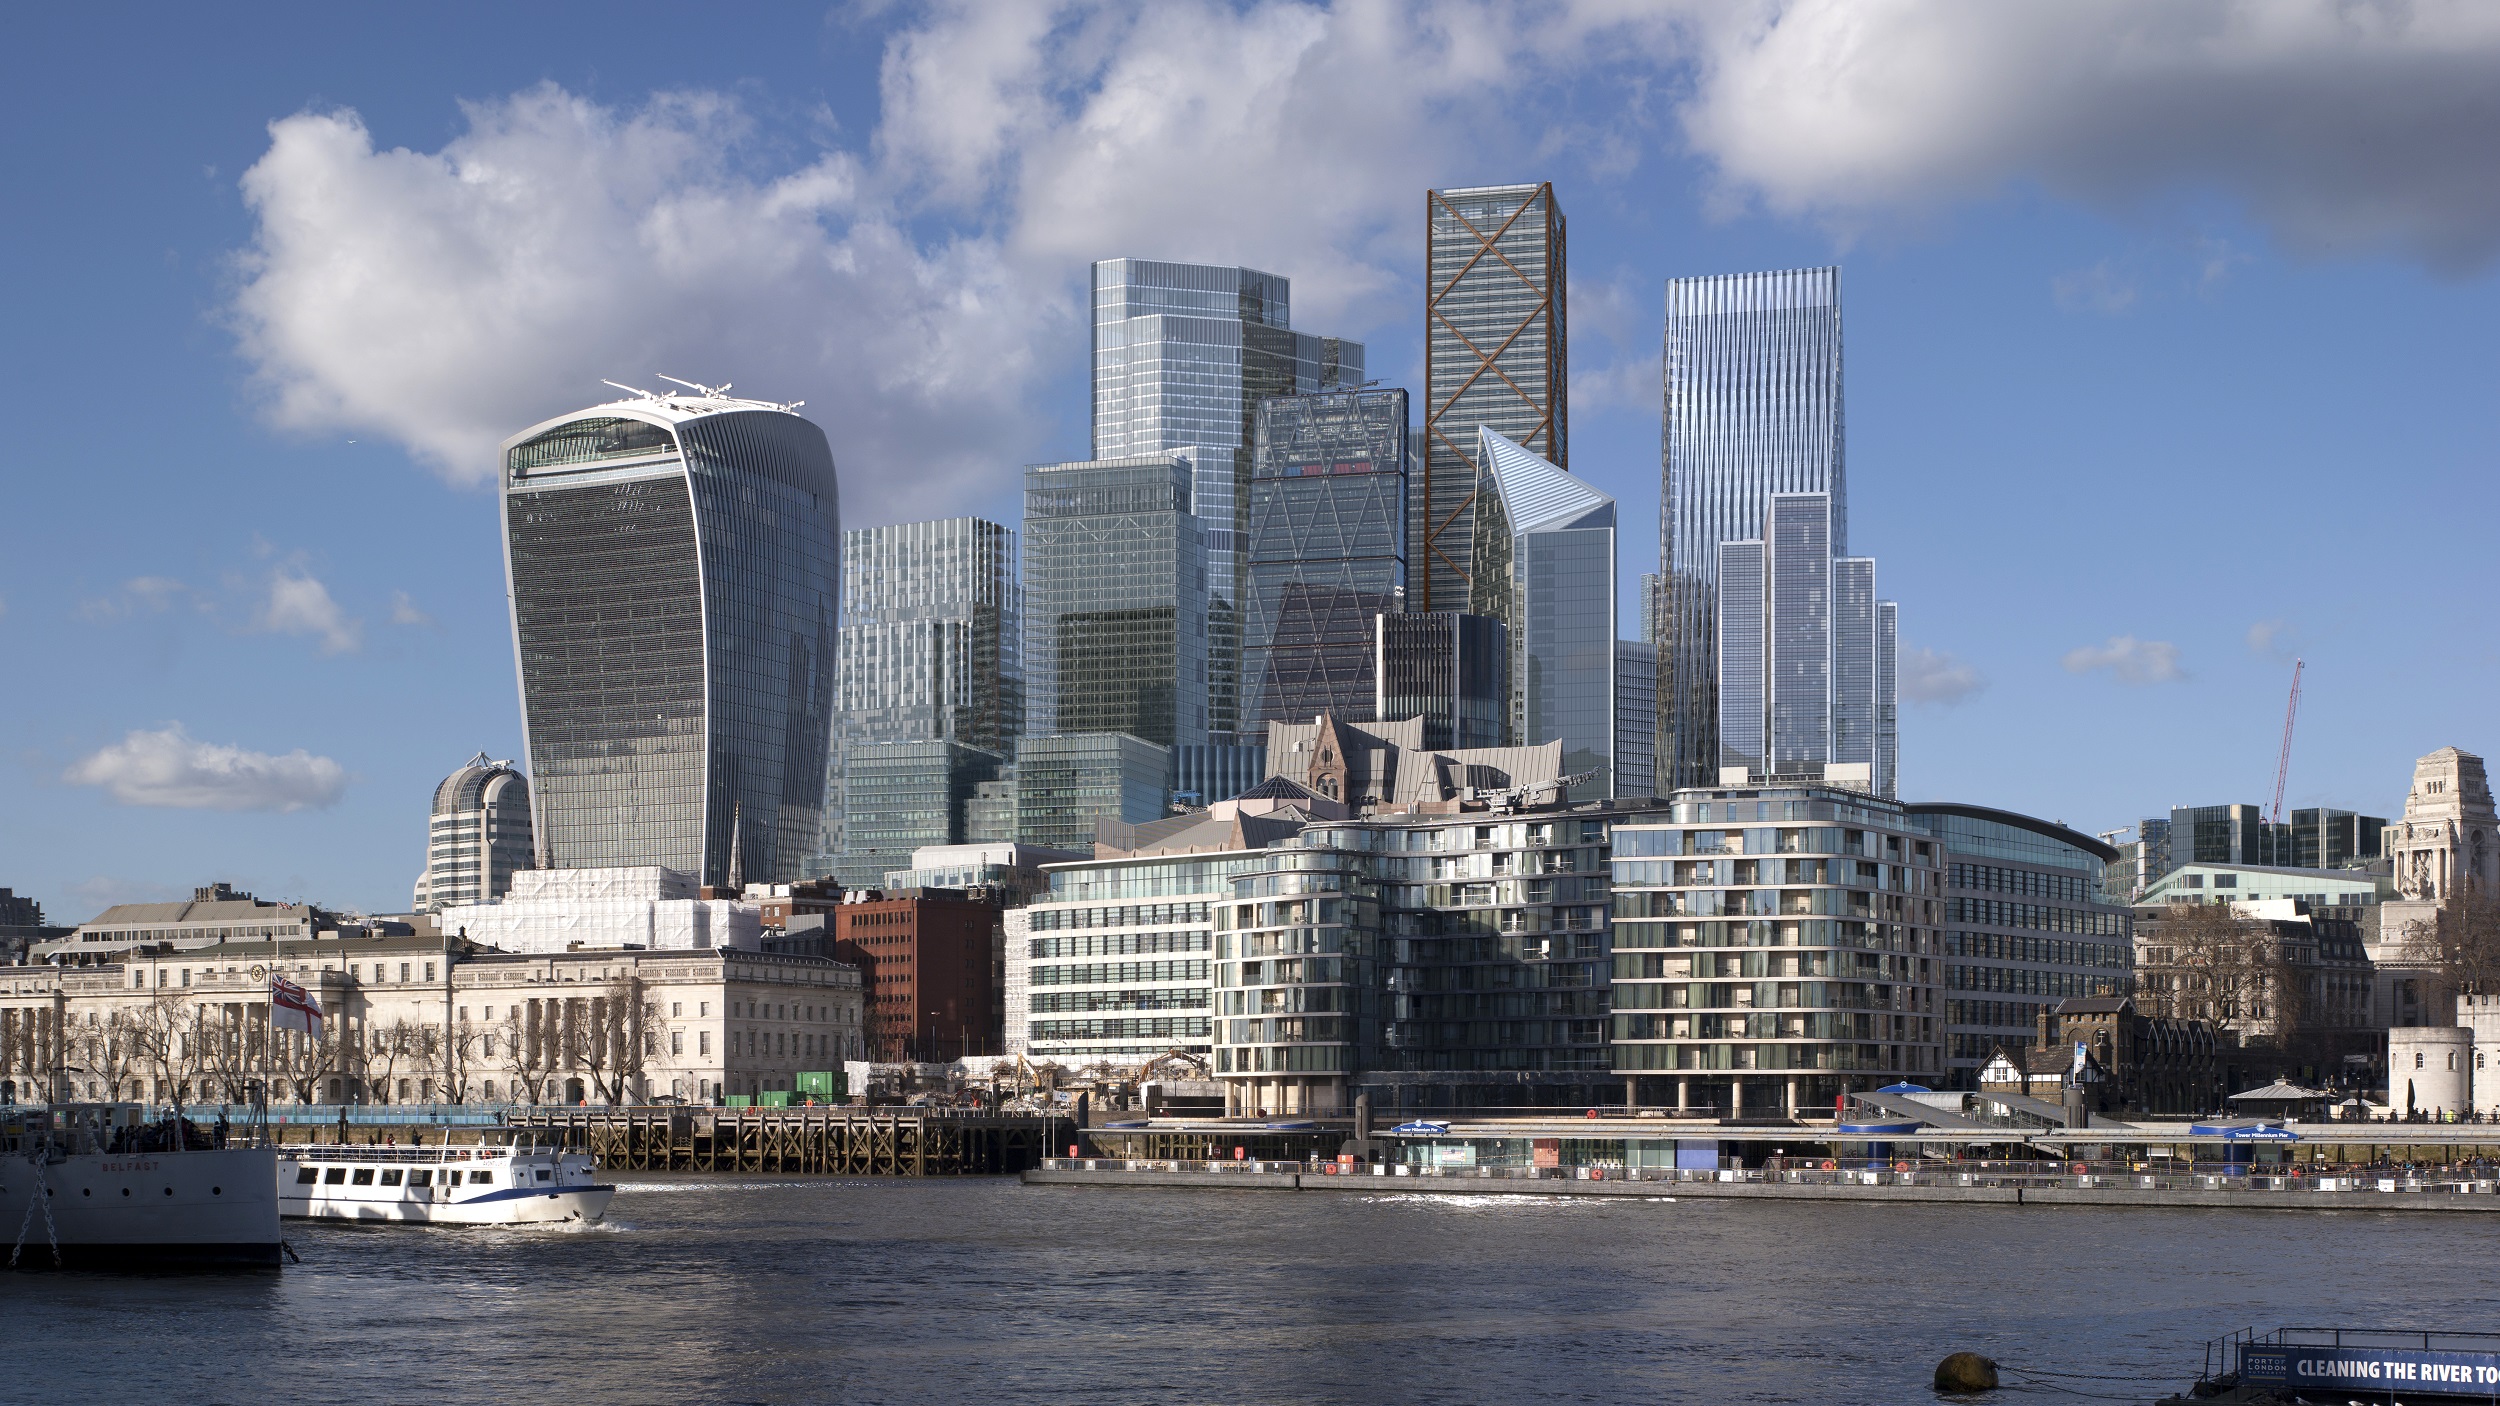 And finally... New images depict of future City of London skyline